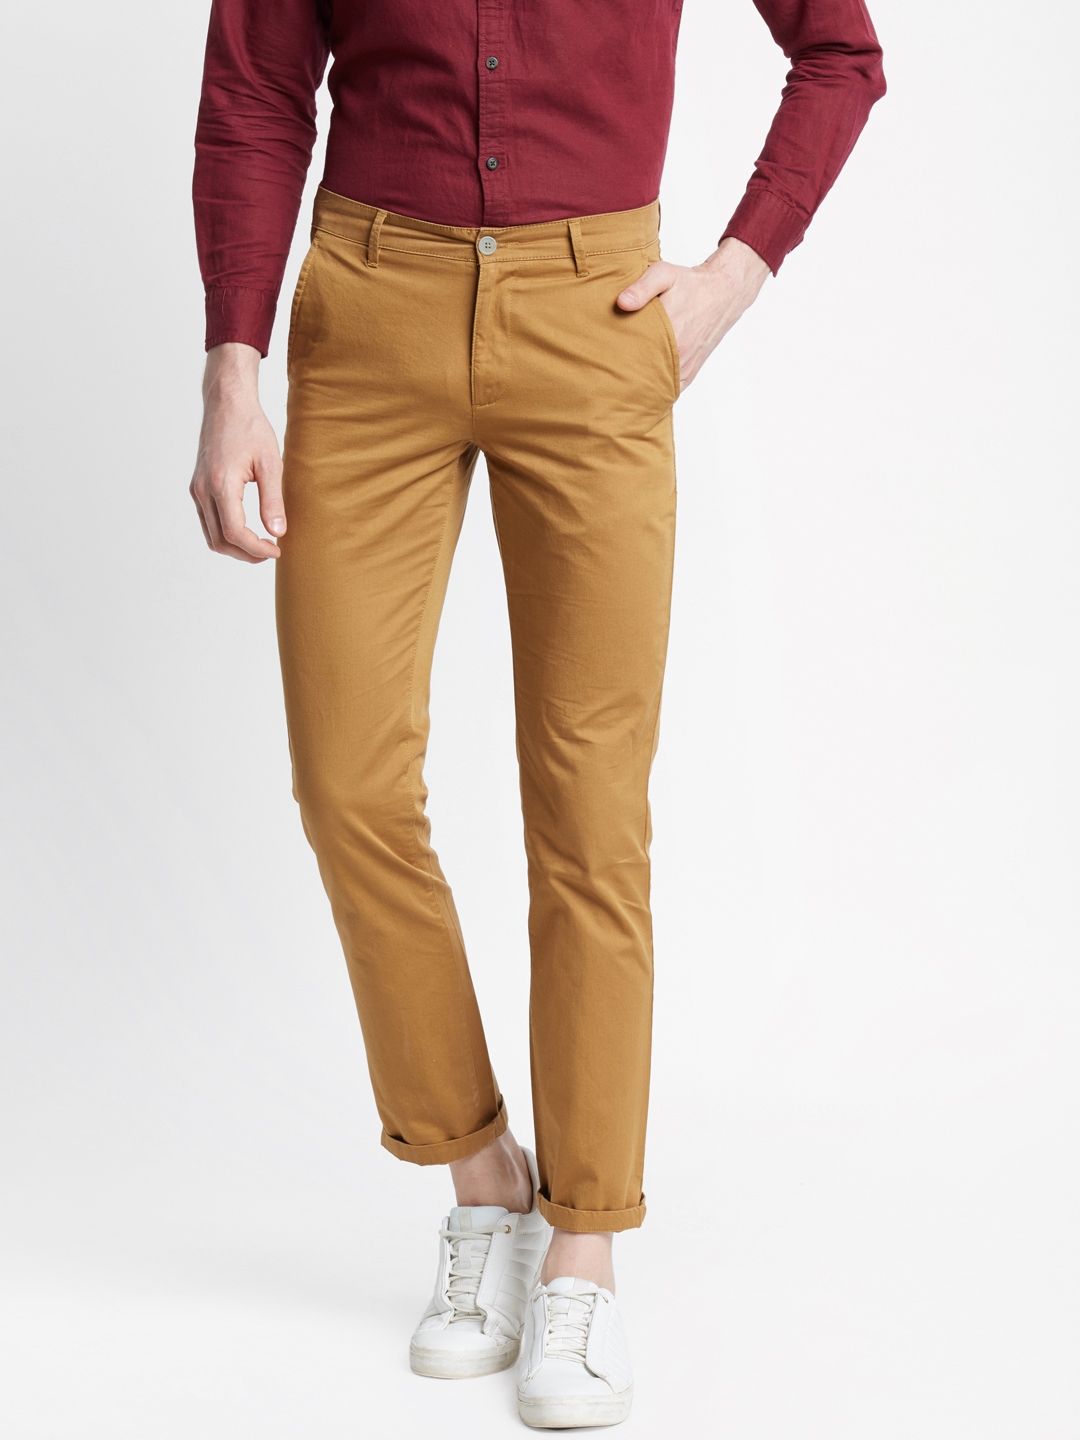 Byford By Pantaloons Trousers  Buy Byford By Pantaloons Trousers online in  India